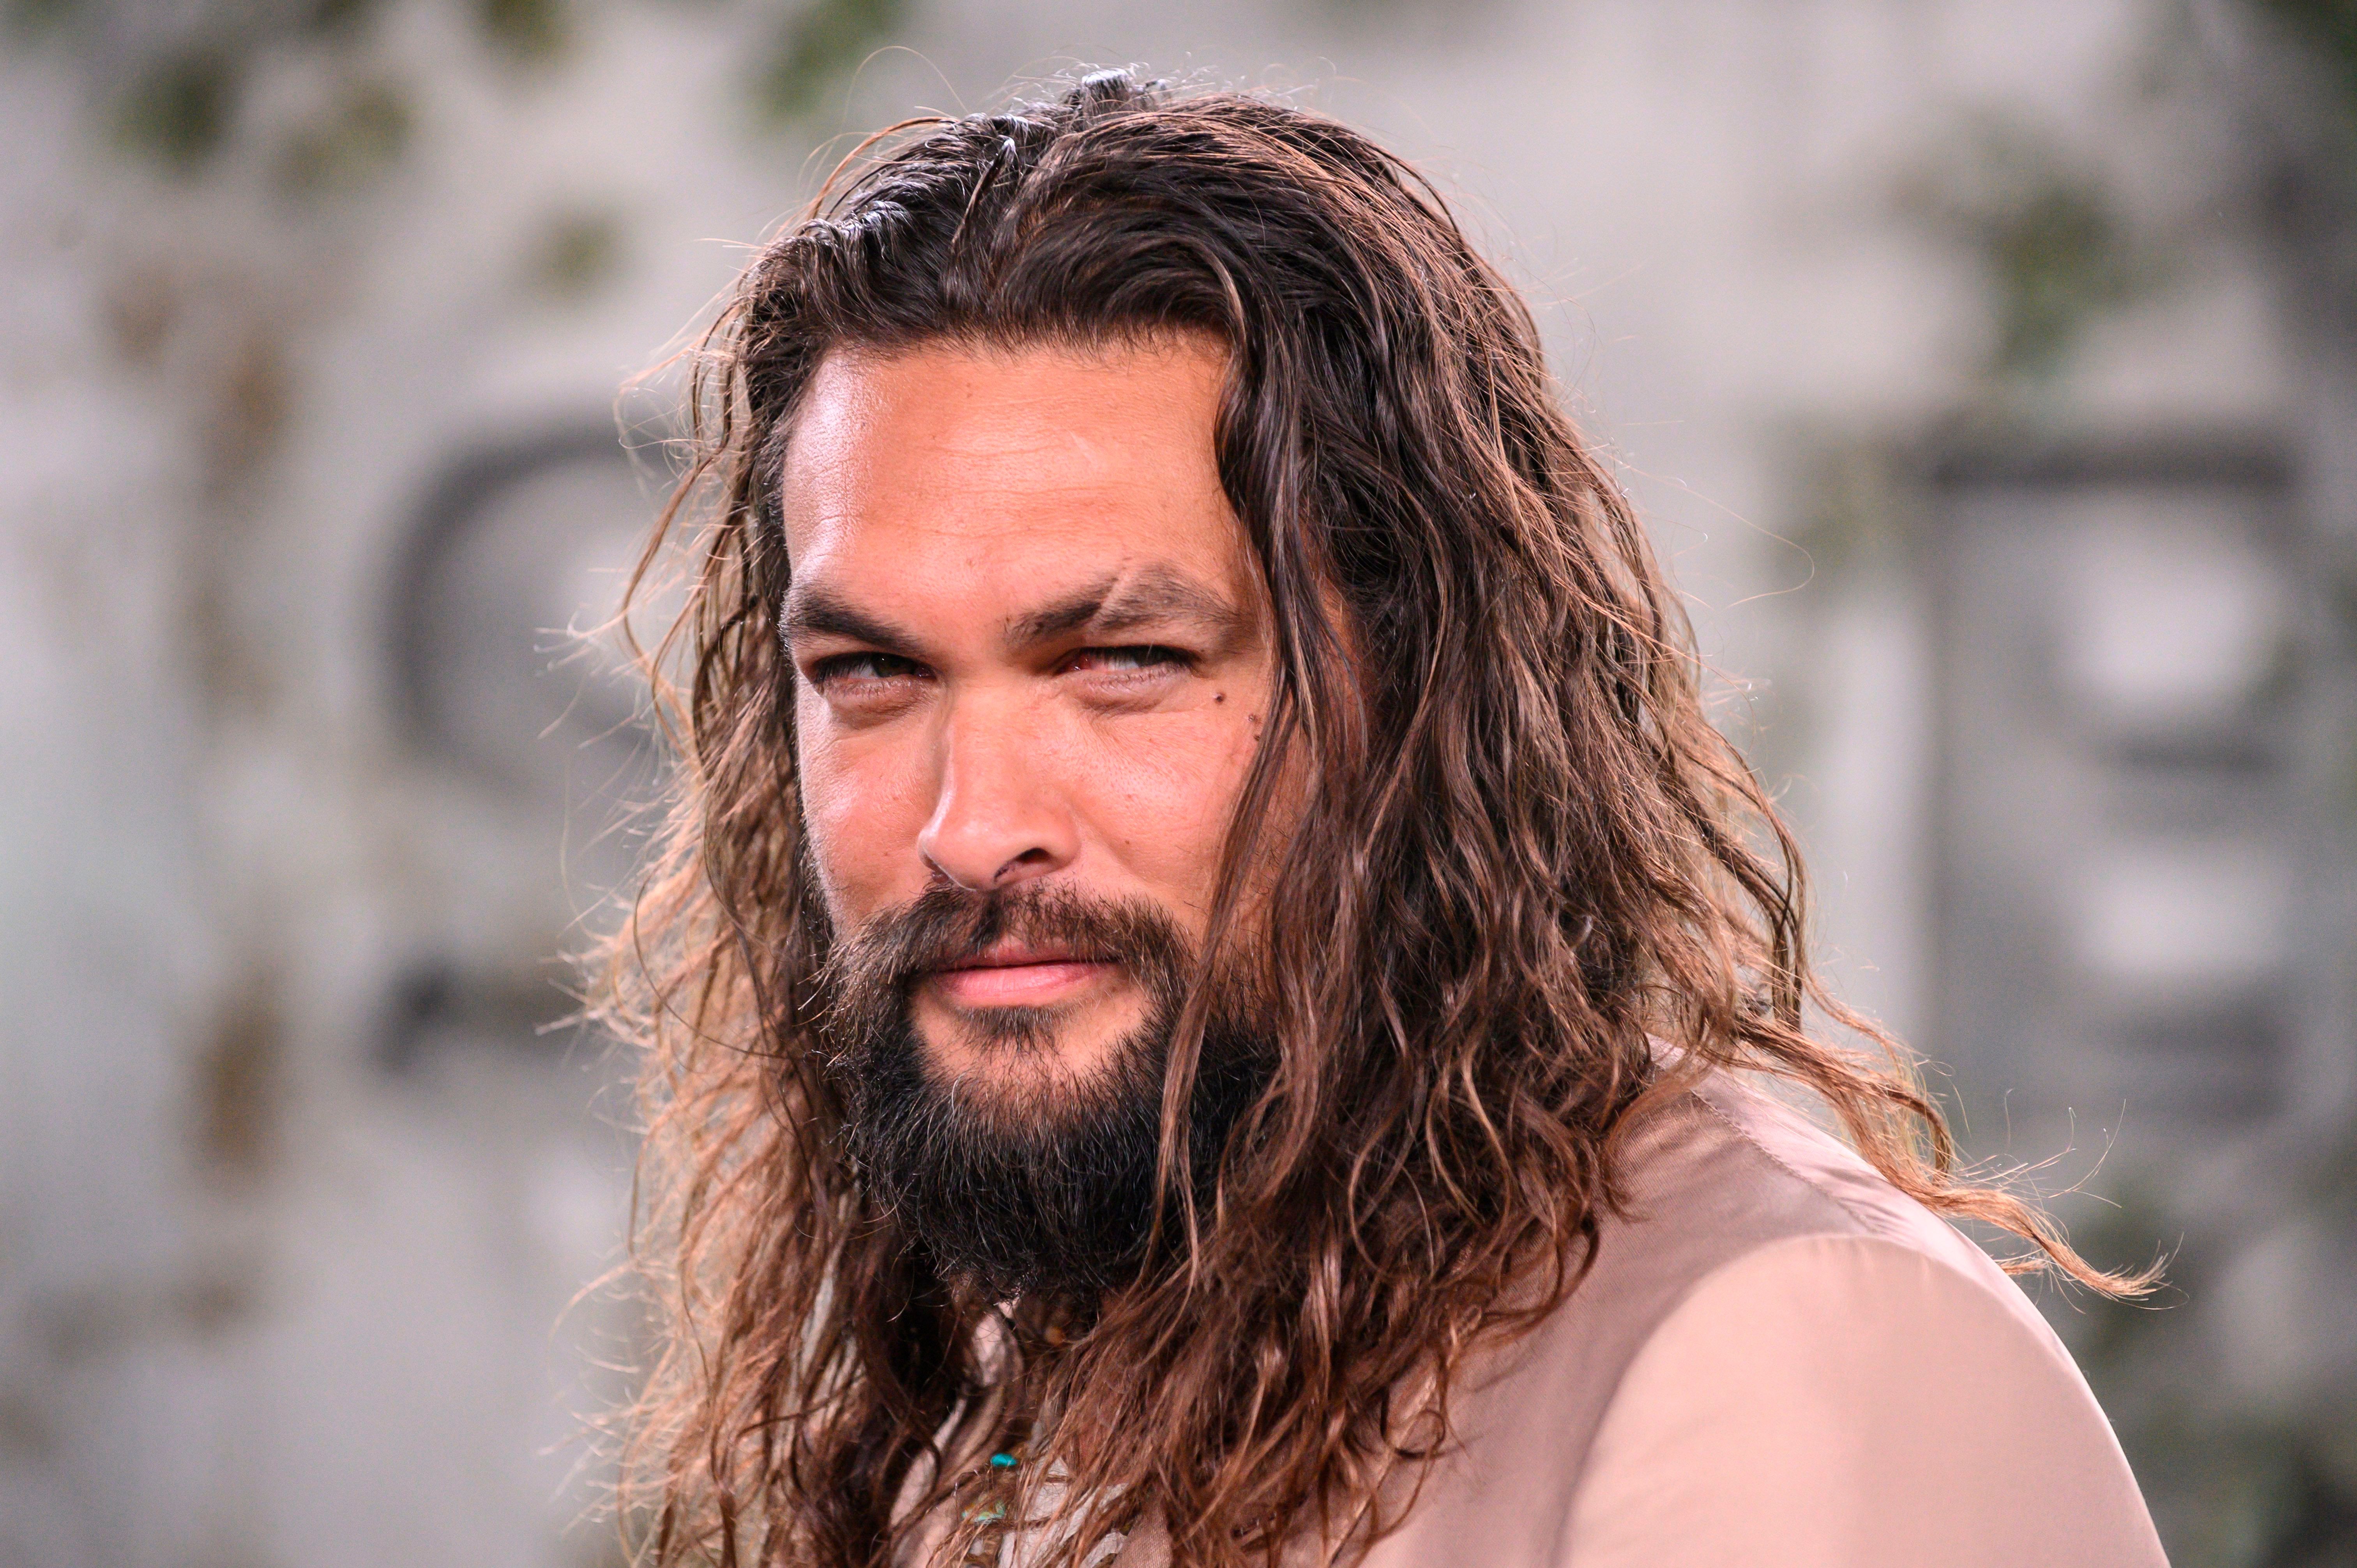 Jason Momoa during the "SEE" premiere at the Fox Regency Village Theater in Los Angeles on October 21, 2019. | Source: Getty Images